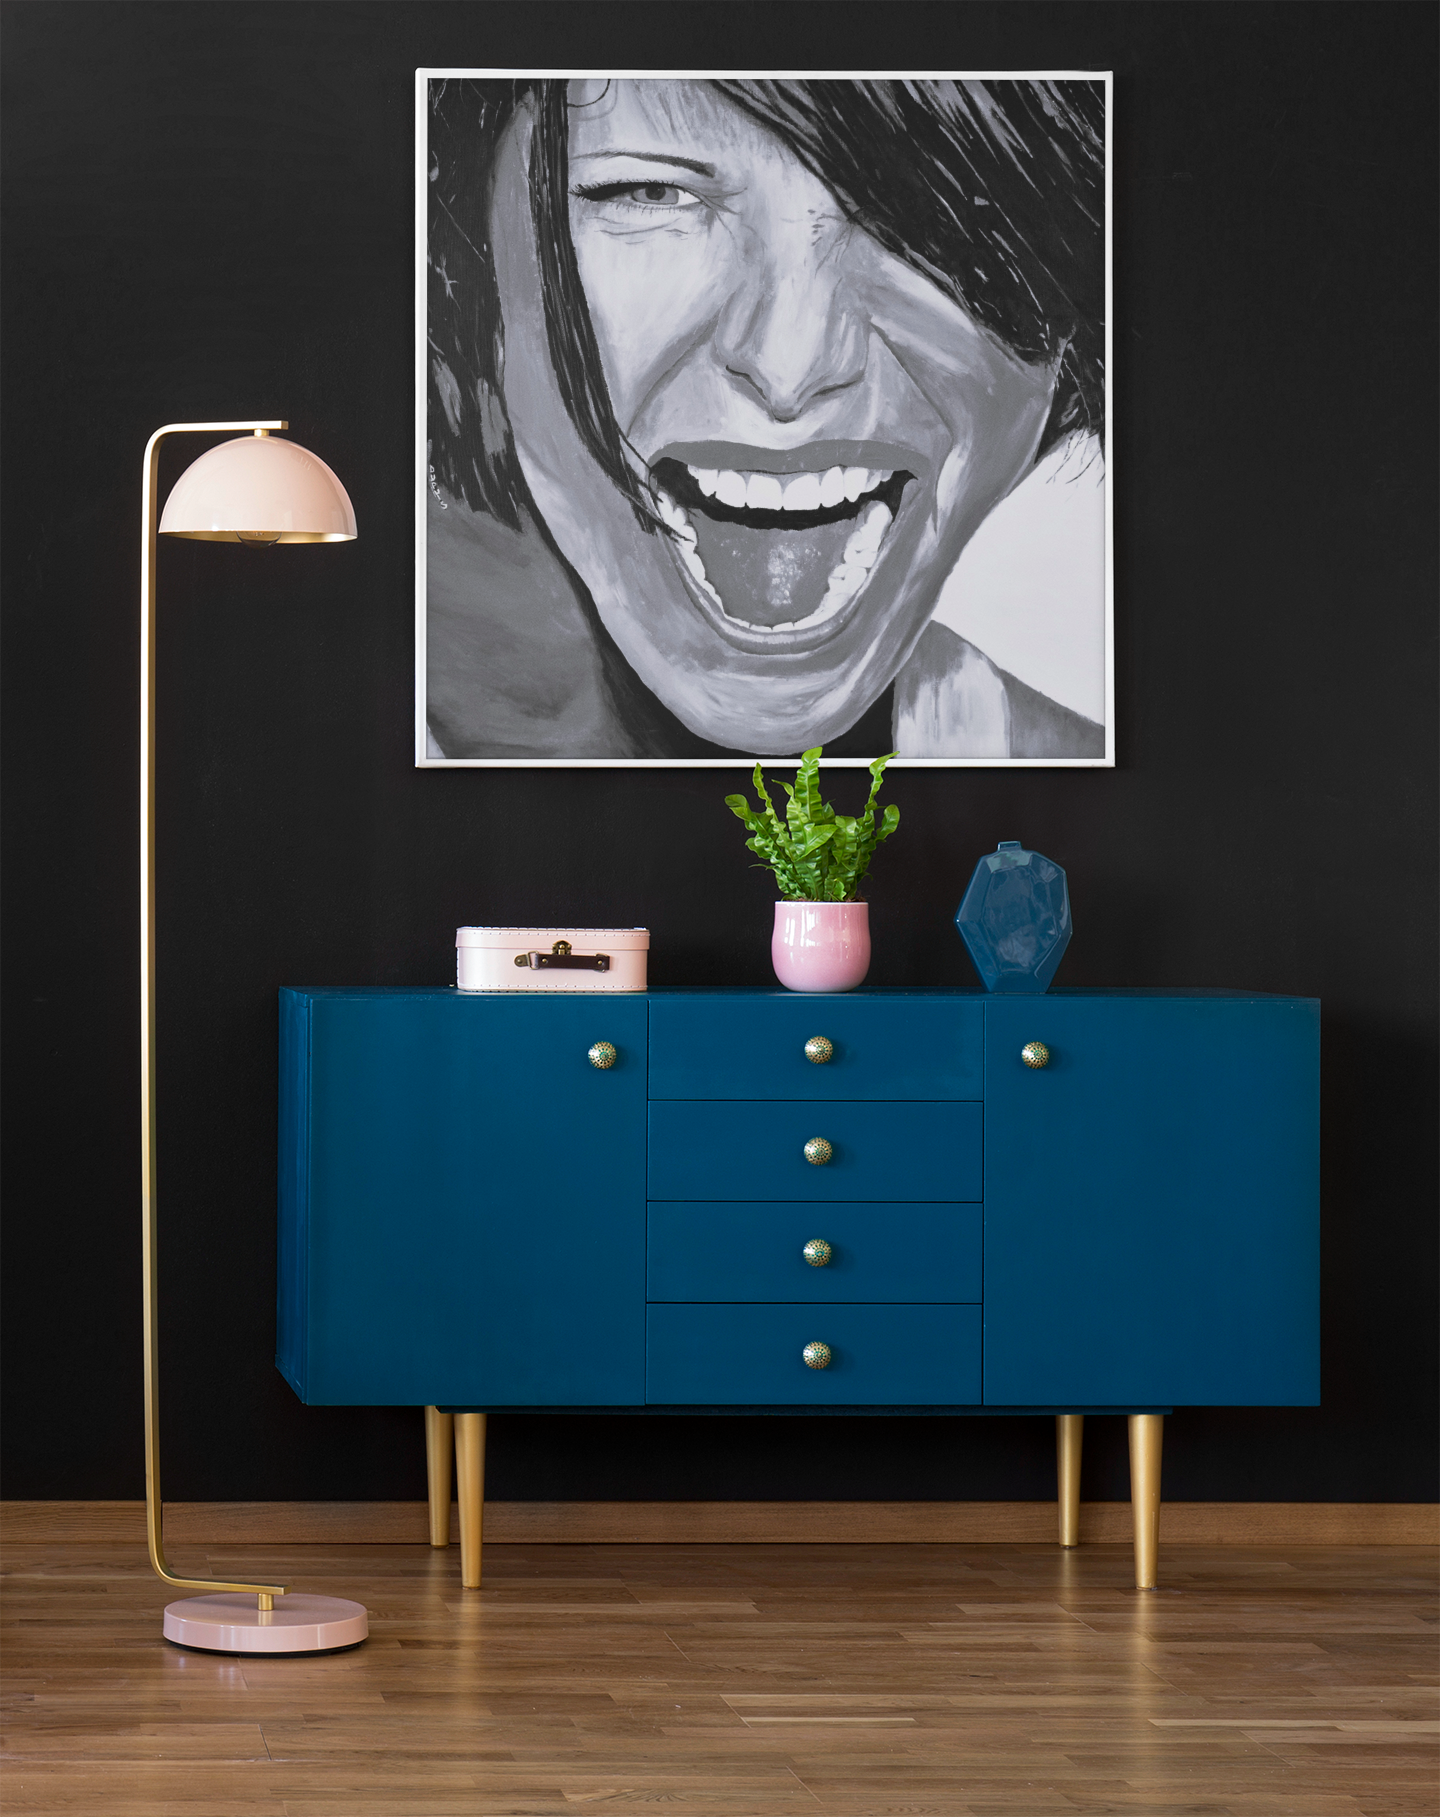 A large Black and White giclee art print of a passionate woman showing emotion, hanging on a wall over a cabinet next to a lamp